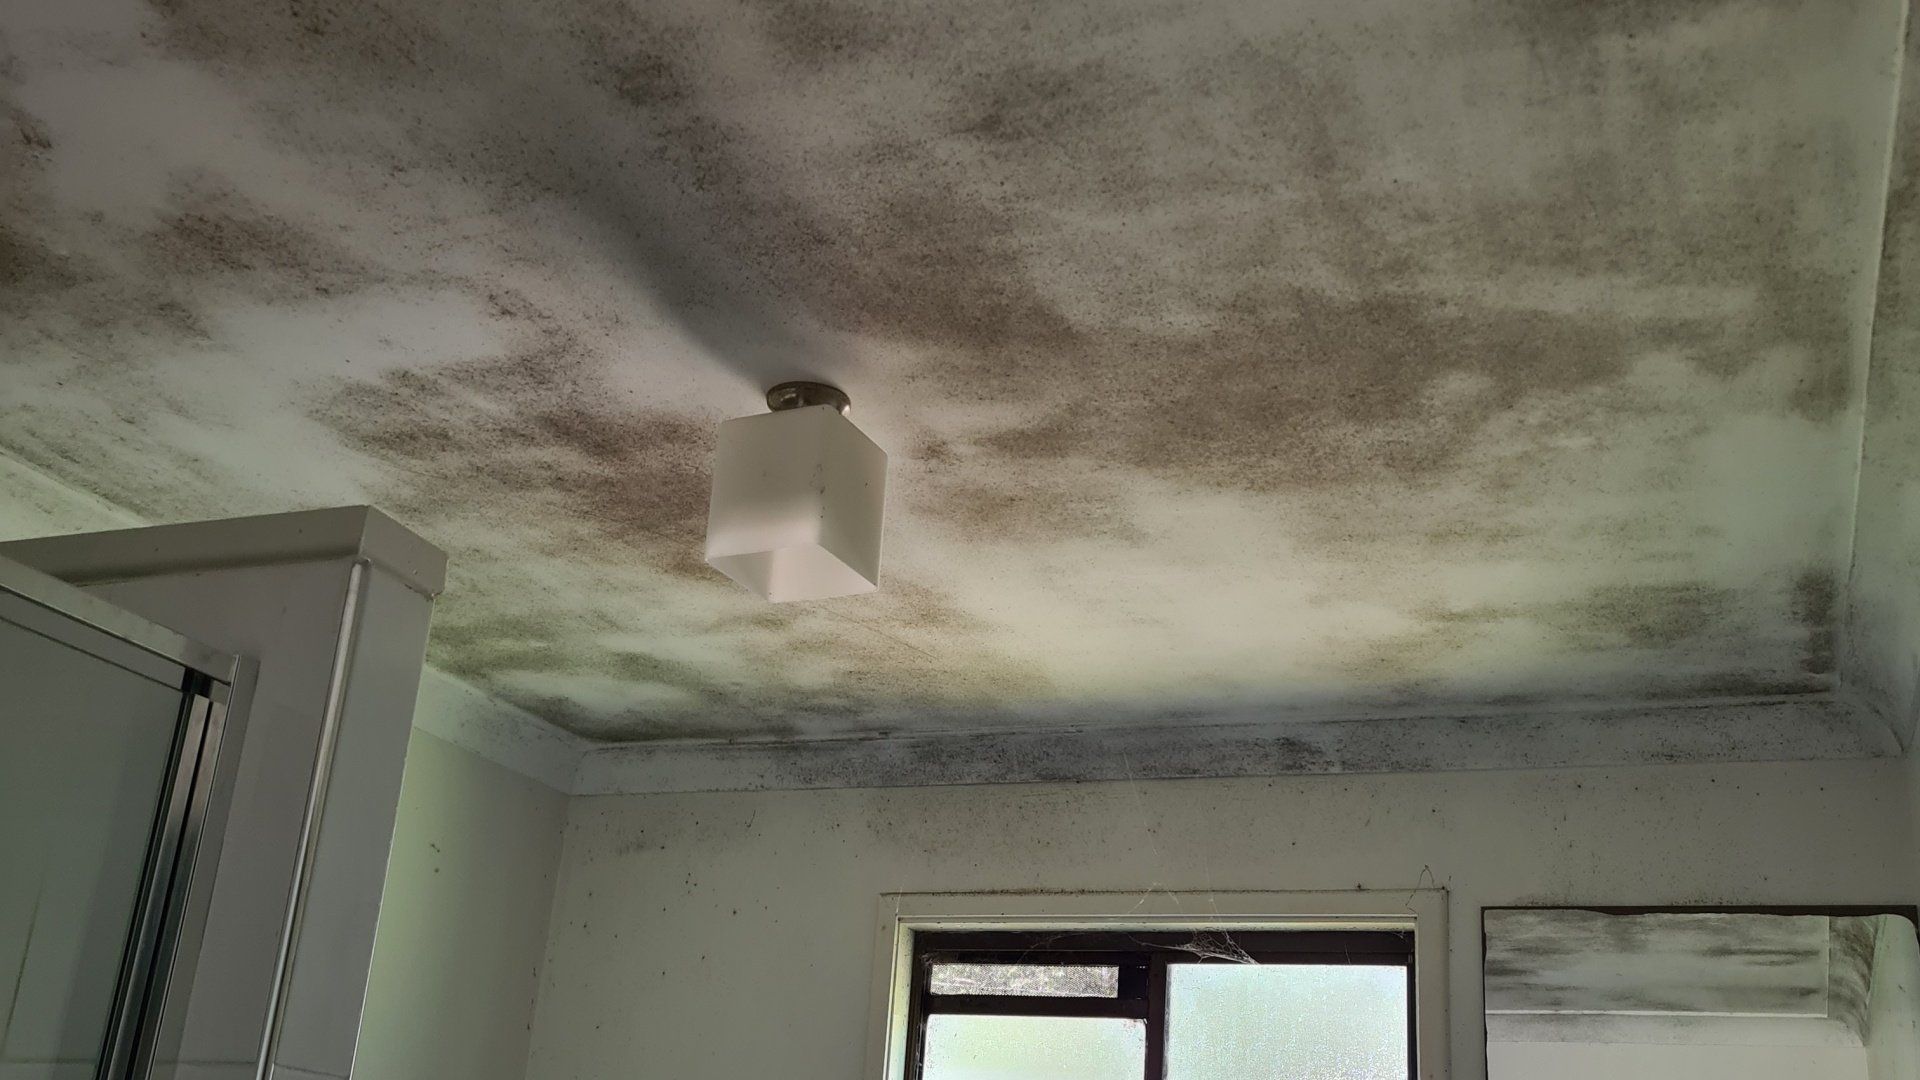 The wet season in Australia is expected to increase mould. How can you reduce health risks?